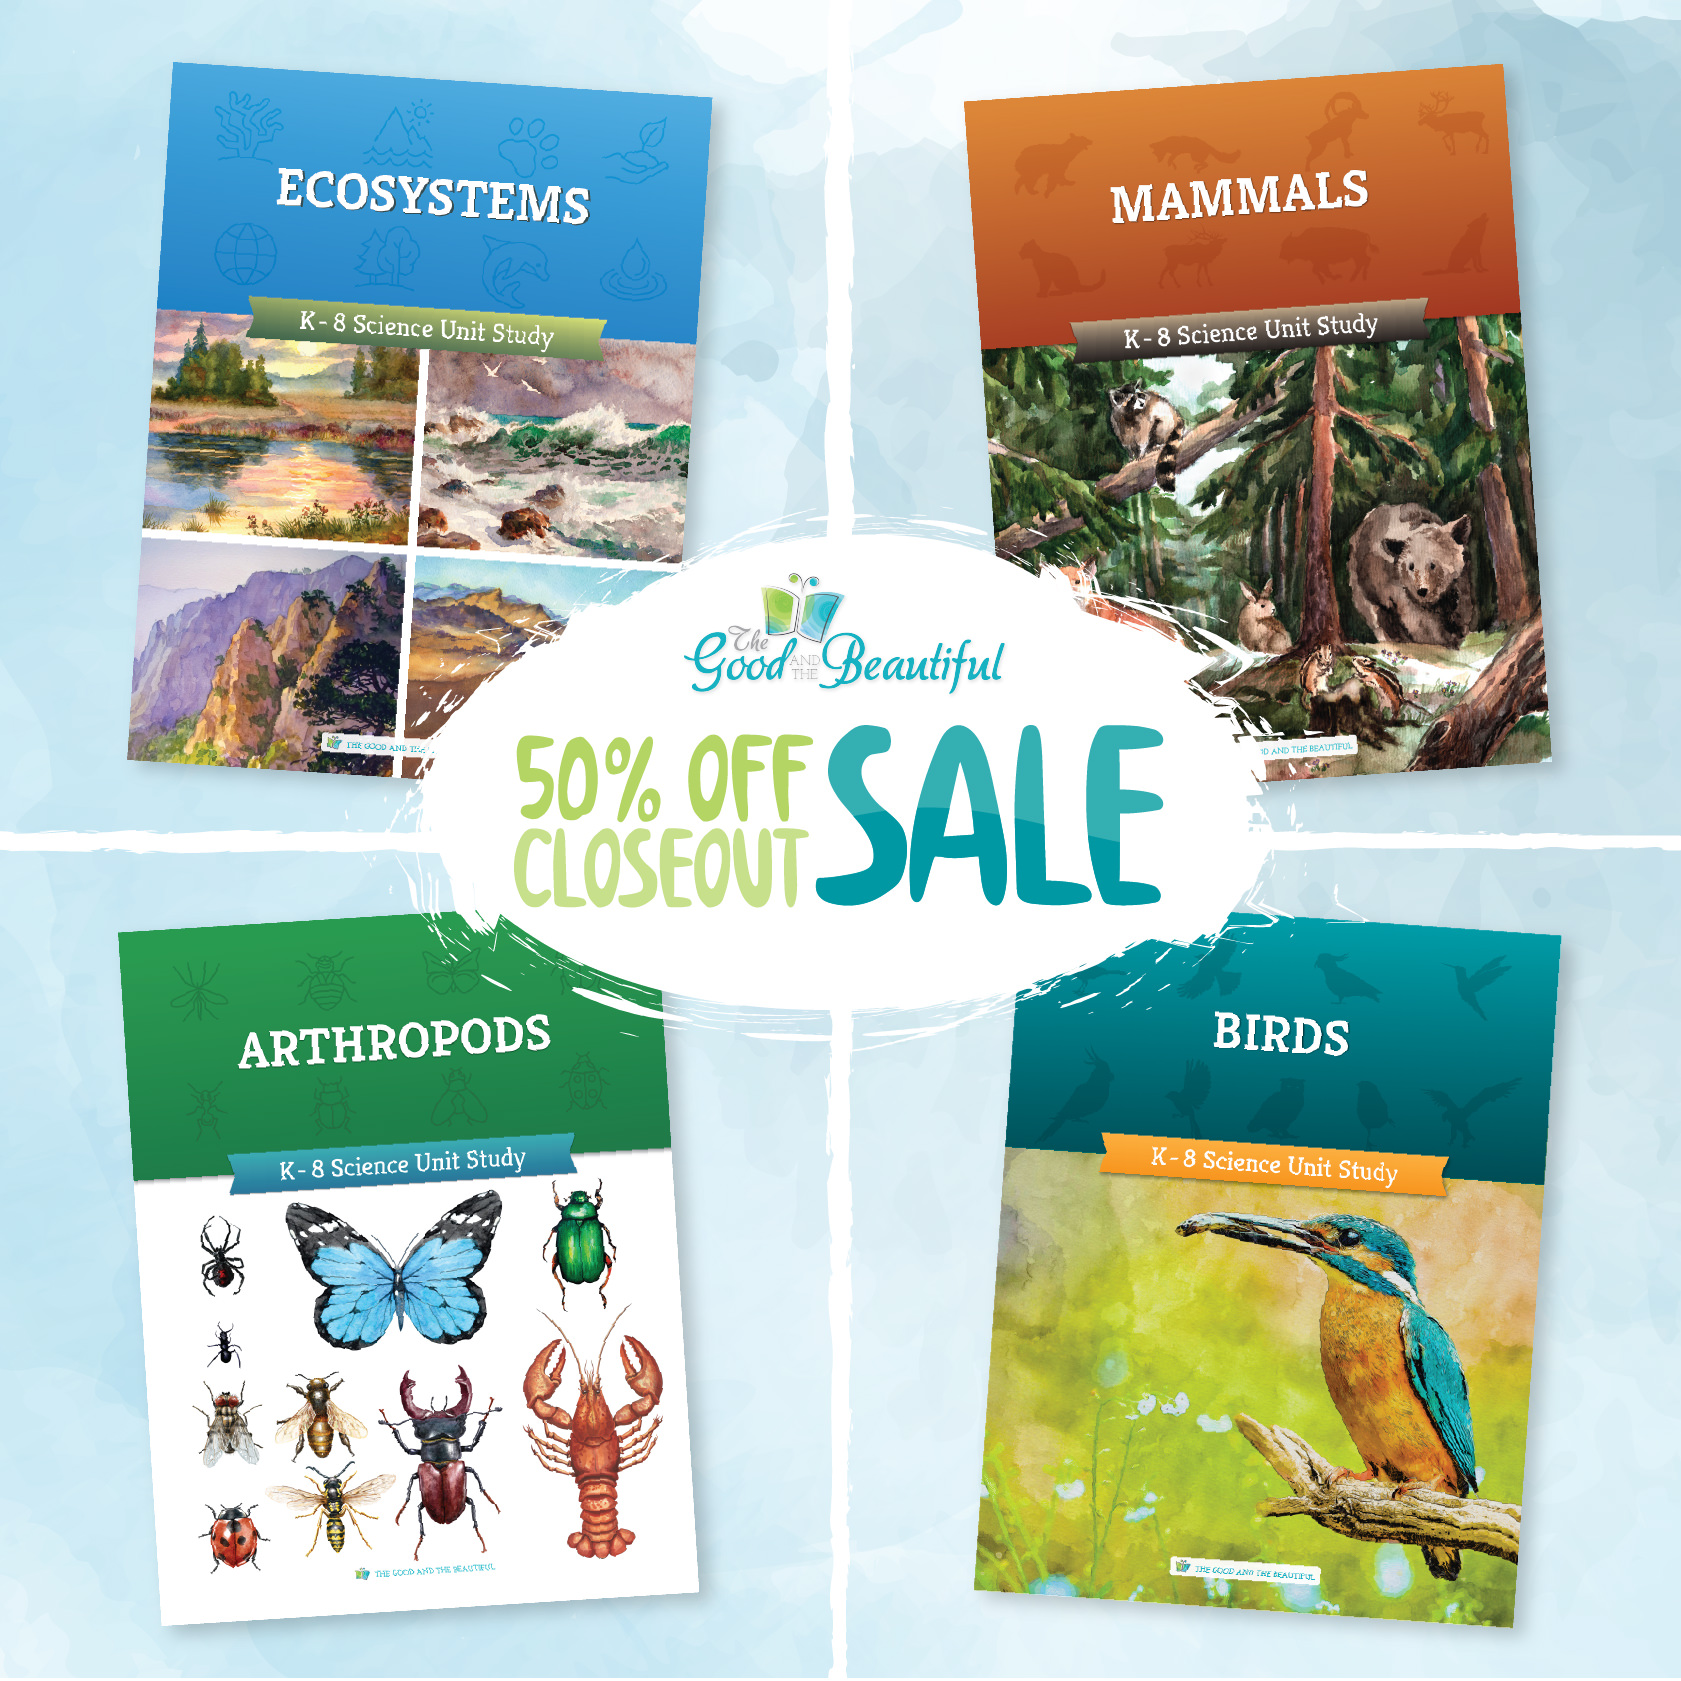 50% off Closeout Sale on Ecosystems, Mammals, Arthropods, and Birds Science Units x i ARTHROPODS 